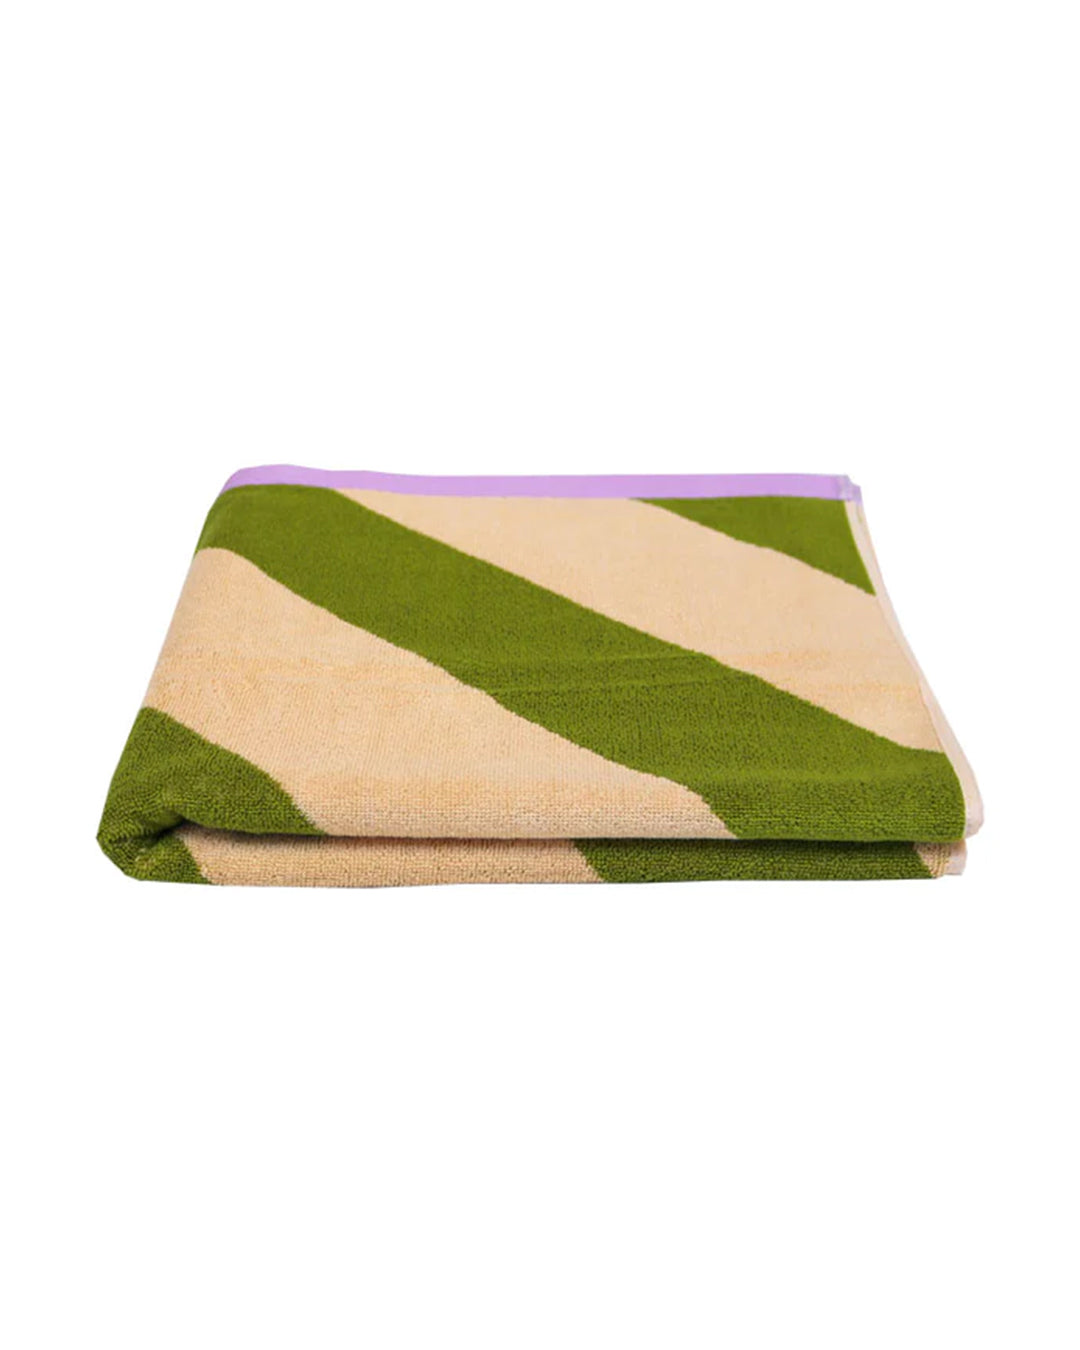 Add this playfulbold stripe to your kids bathroooms. The wide diagonal stripe in Pistachio and Cream with a lilac trim adds personality and fun to this fun style. Meticulously crafted for luxury ,these ultra-plush towels are made from 100% organic cotton for the dreamiest feel against your kids delicate skin. Designed in Melbourne Australia, ethically made in Portugal.